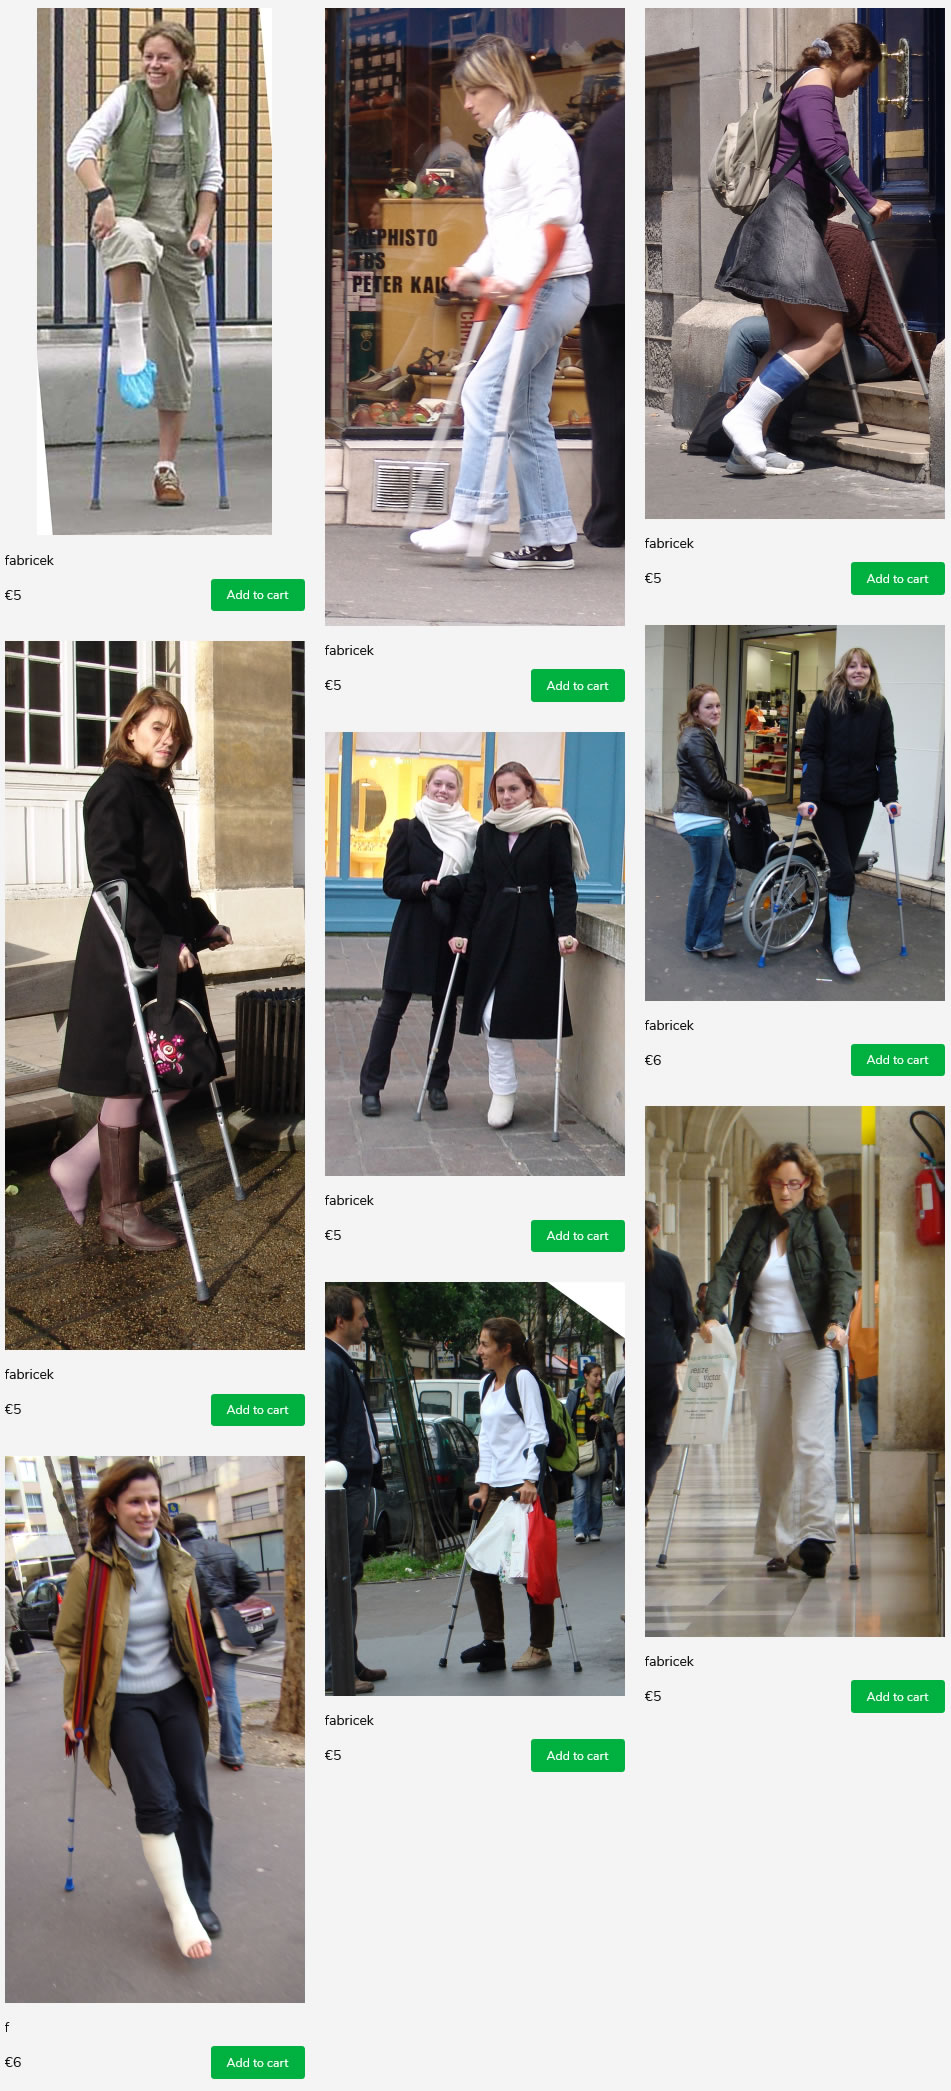 9 sets of women in the streets of france - all with their legs in plaster / fiber casts and socks over the casts...